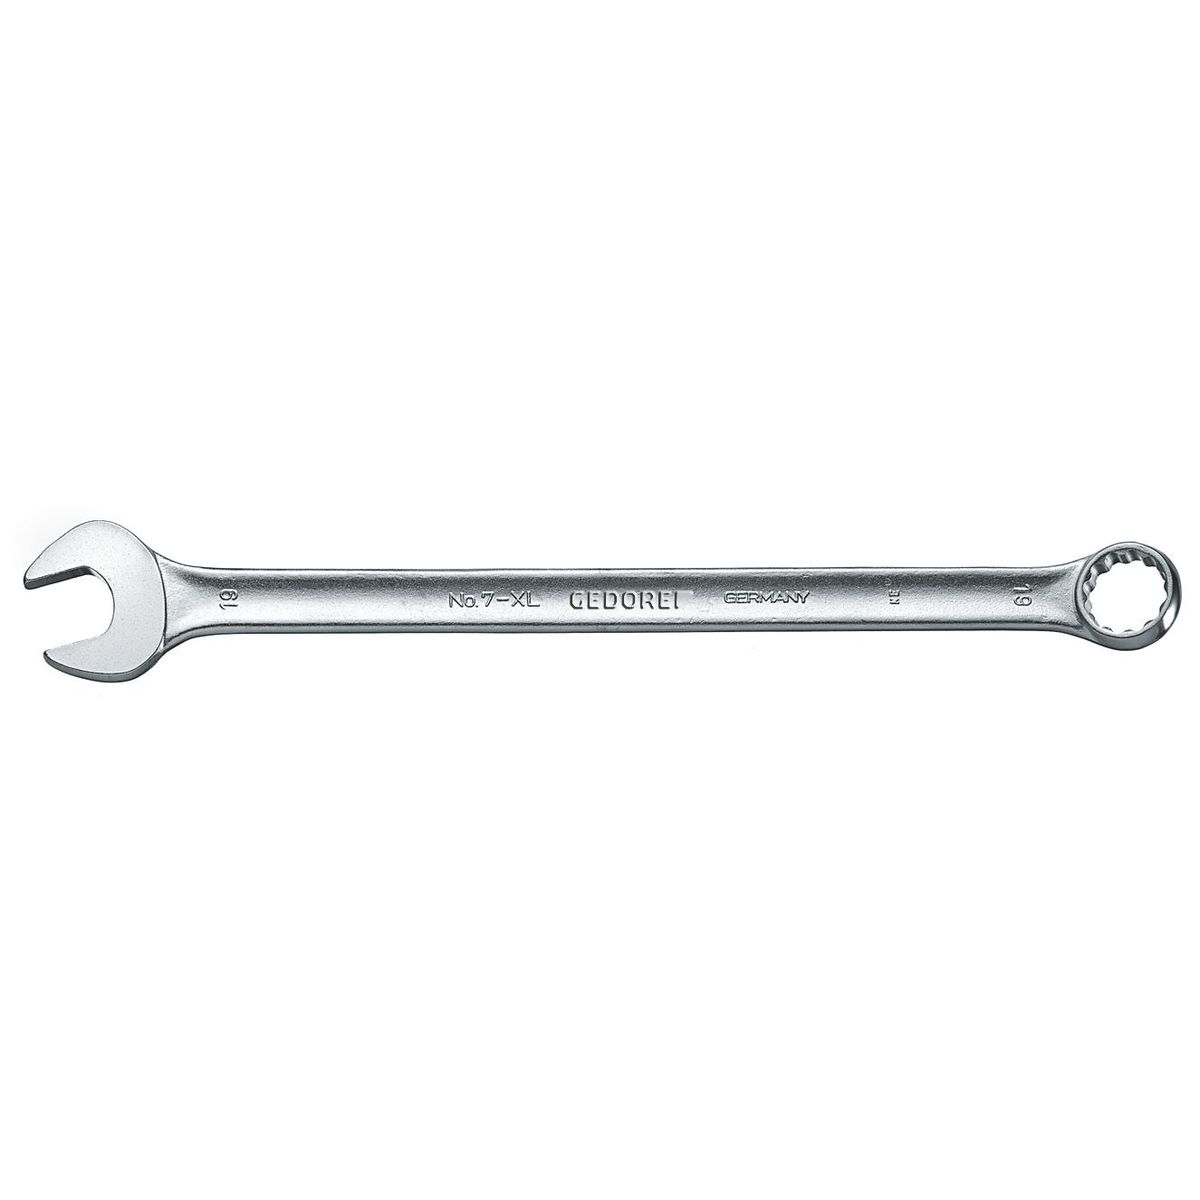 Combination spanner, extra long 34mm No.7 XL 34 Gedore